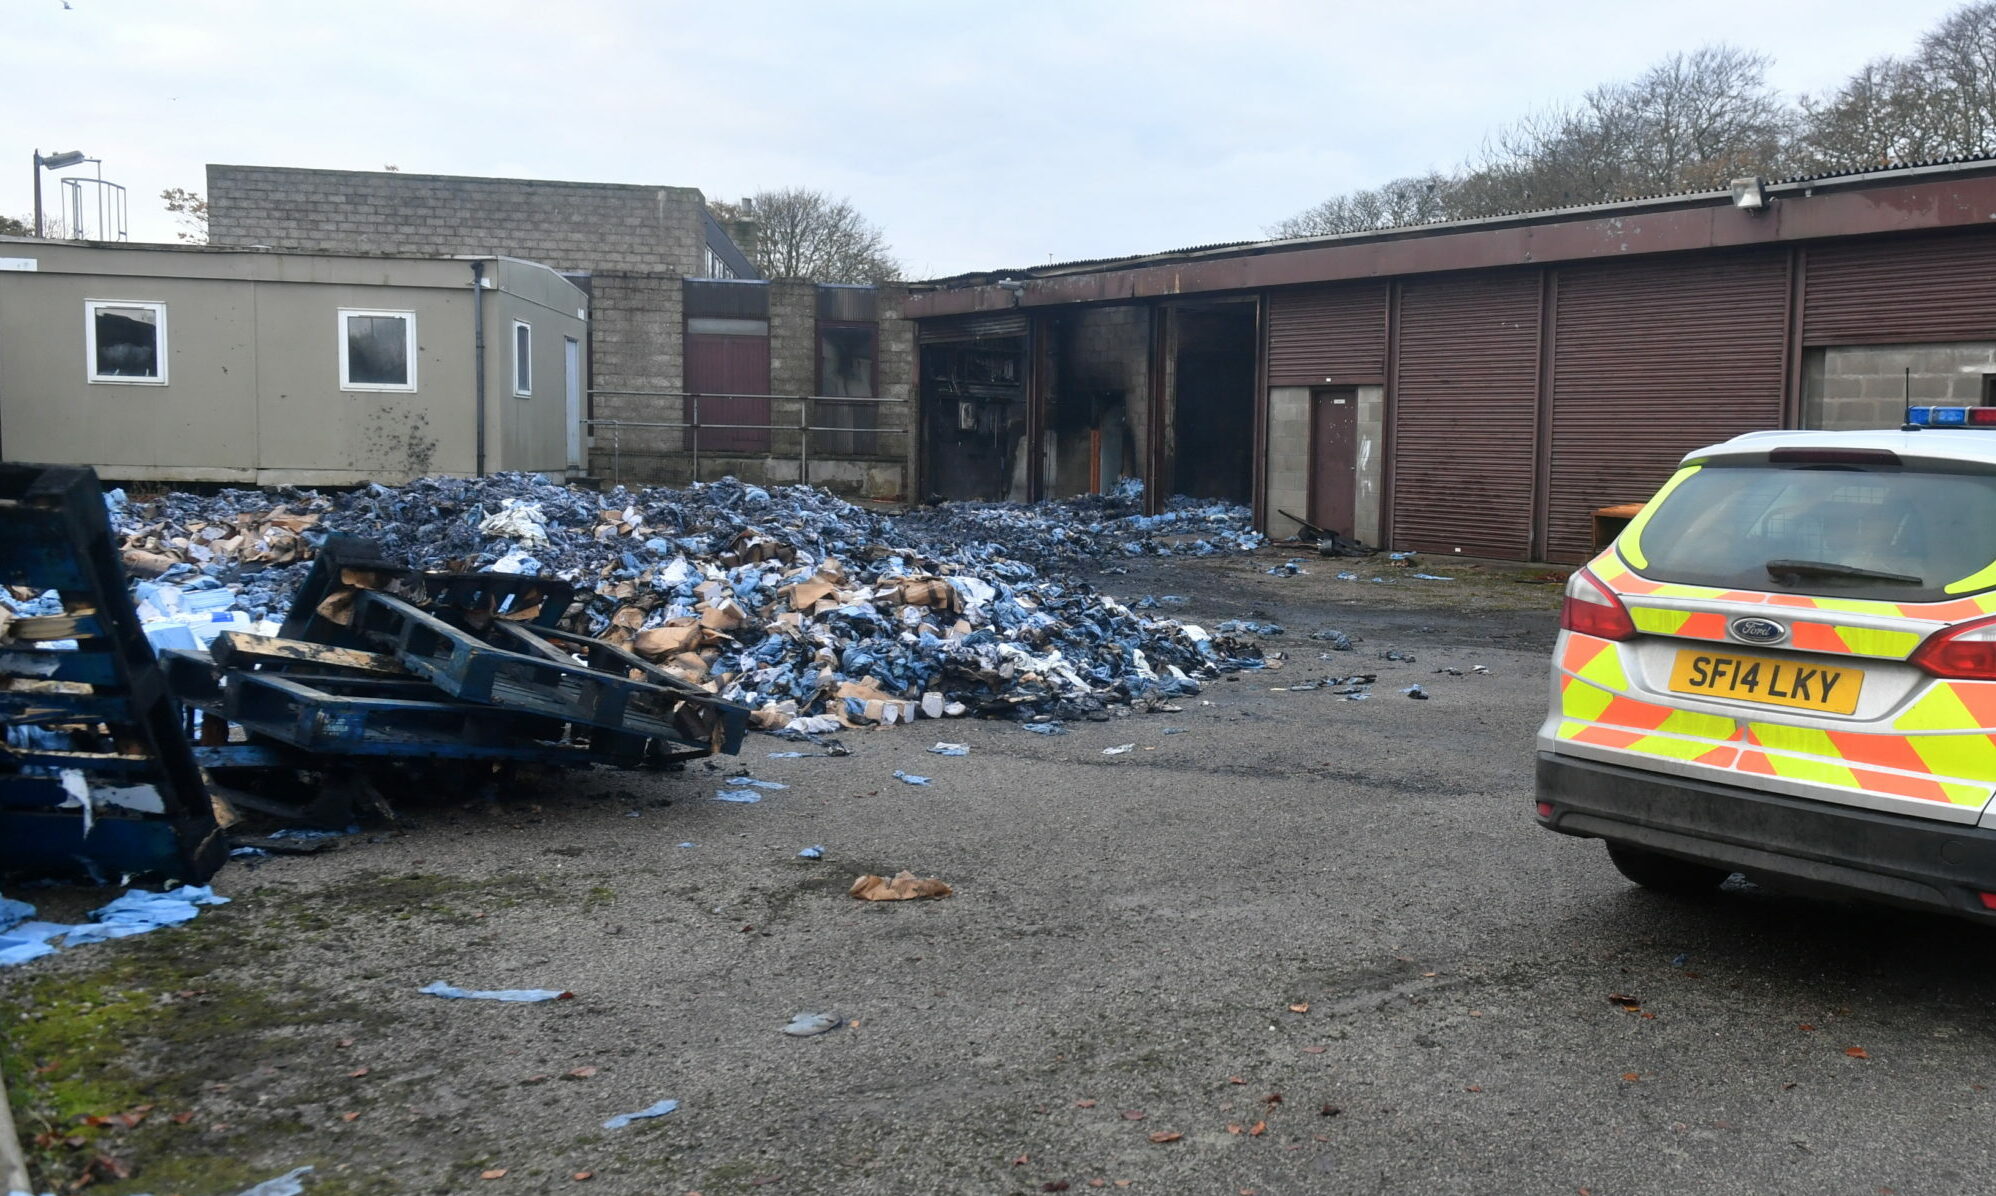 The former Territorial Army barracks building blackened after the 2019 fire was extinguished.